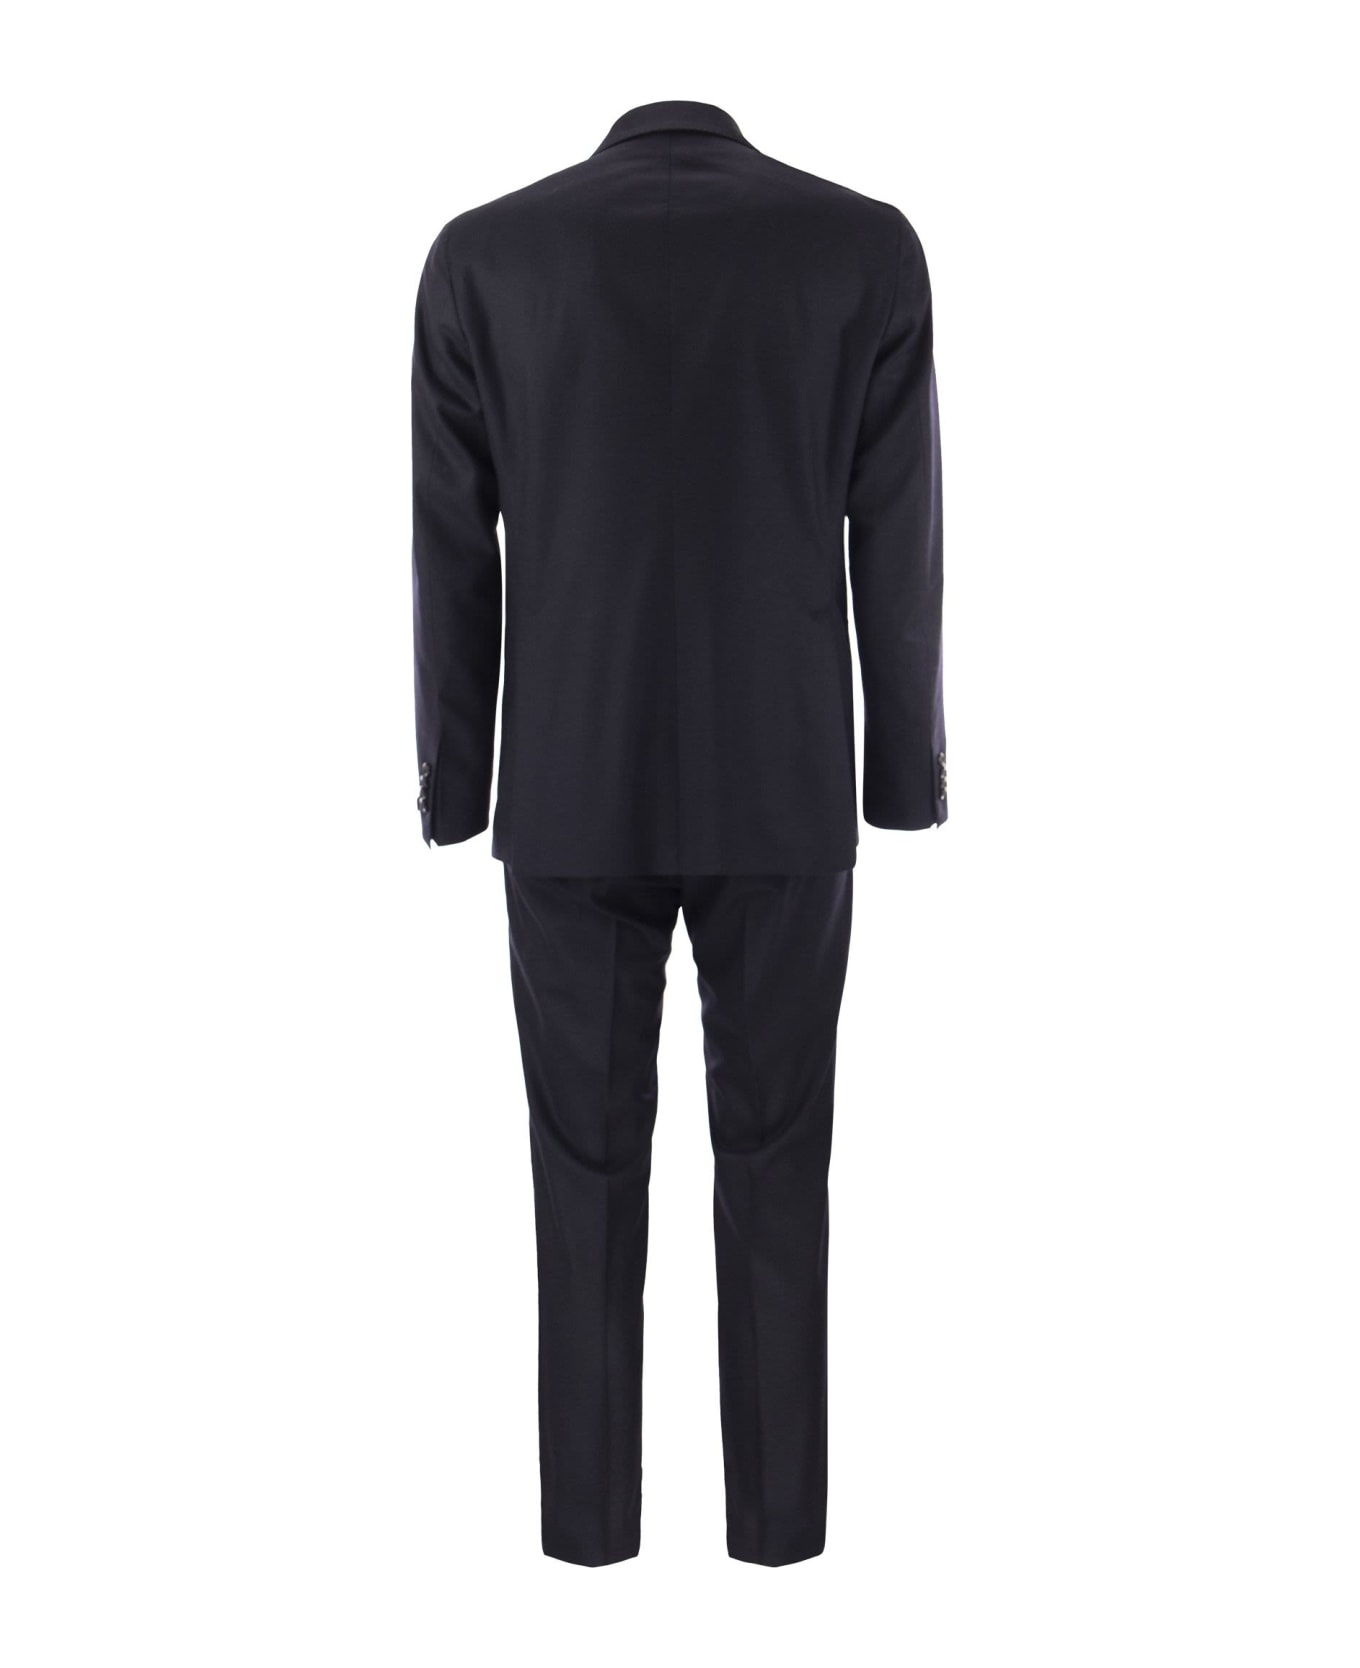 Tagliatore Suit In Wool And Cashmere - Blue スーツ